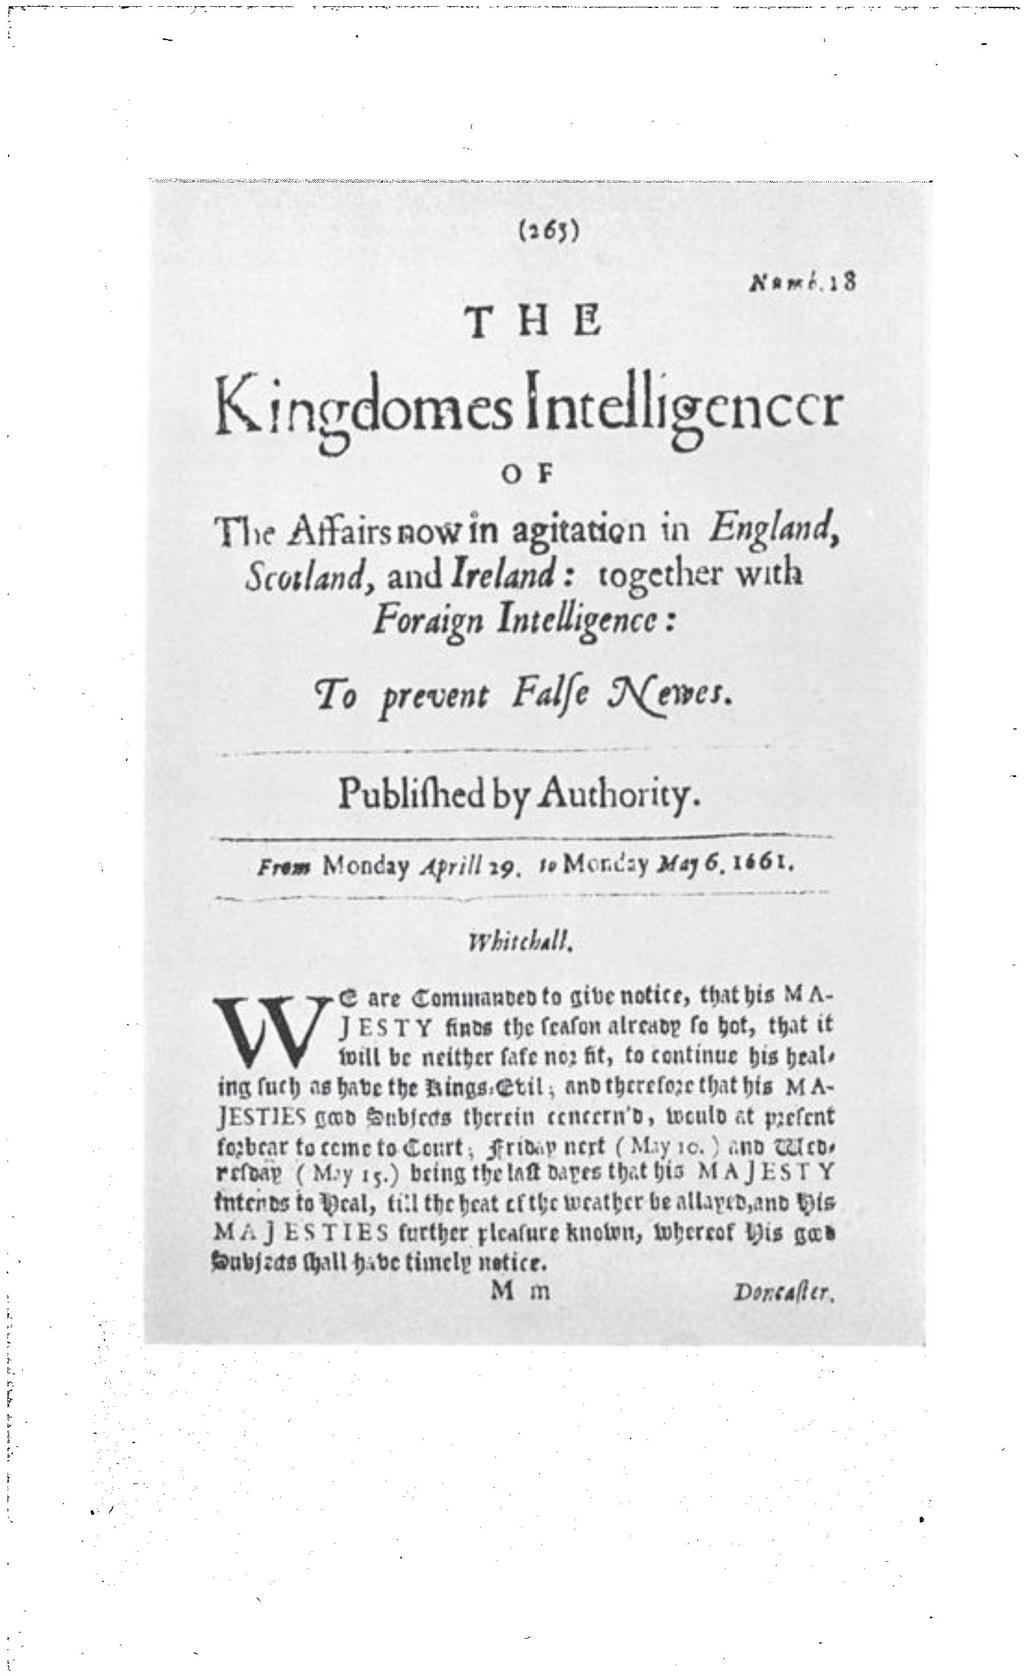 (36 J) T H E Html, l3 Kingdomcs Intelligcnccr O F TV Affairs now in agitation in England, Scotland, and Ireland : together with Foraign Intelligence : To prevent Falfe Scenes. Publifhed by Authority.